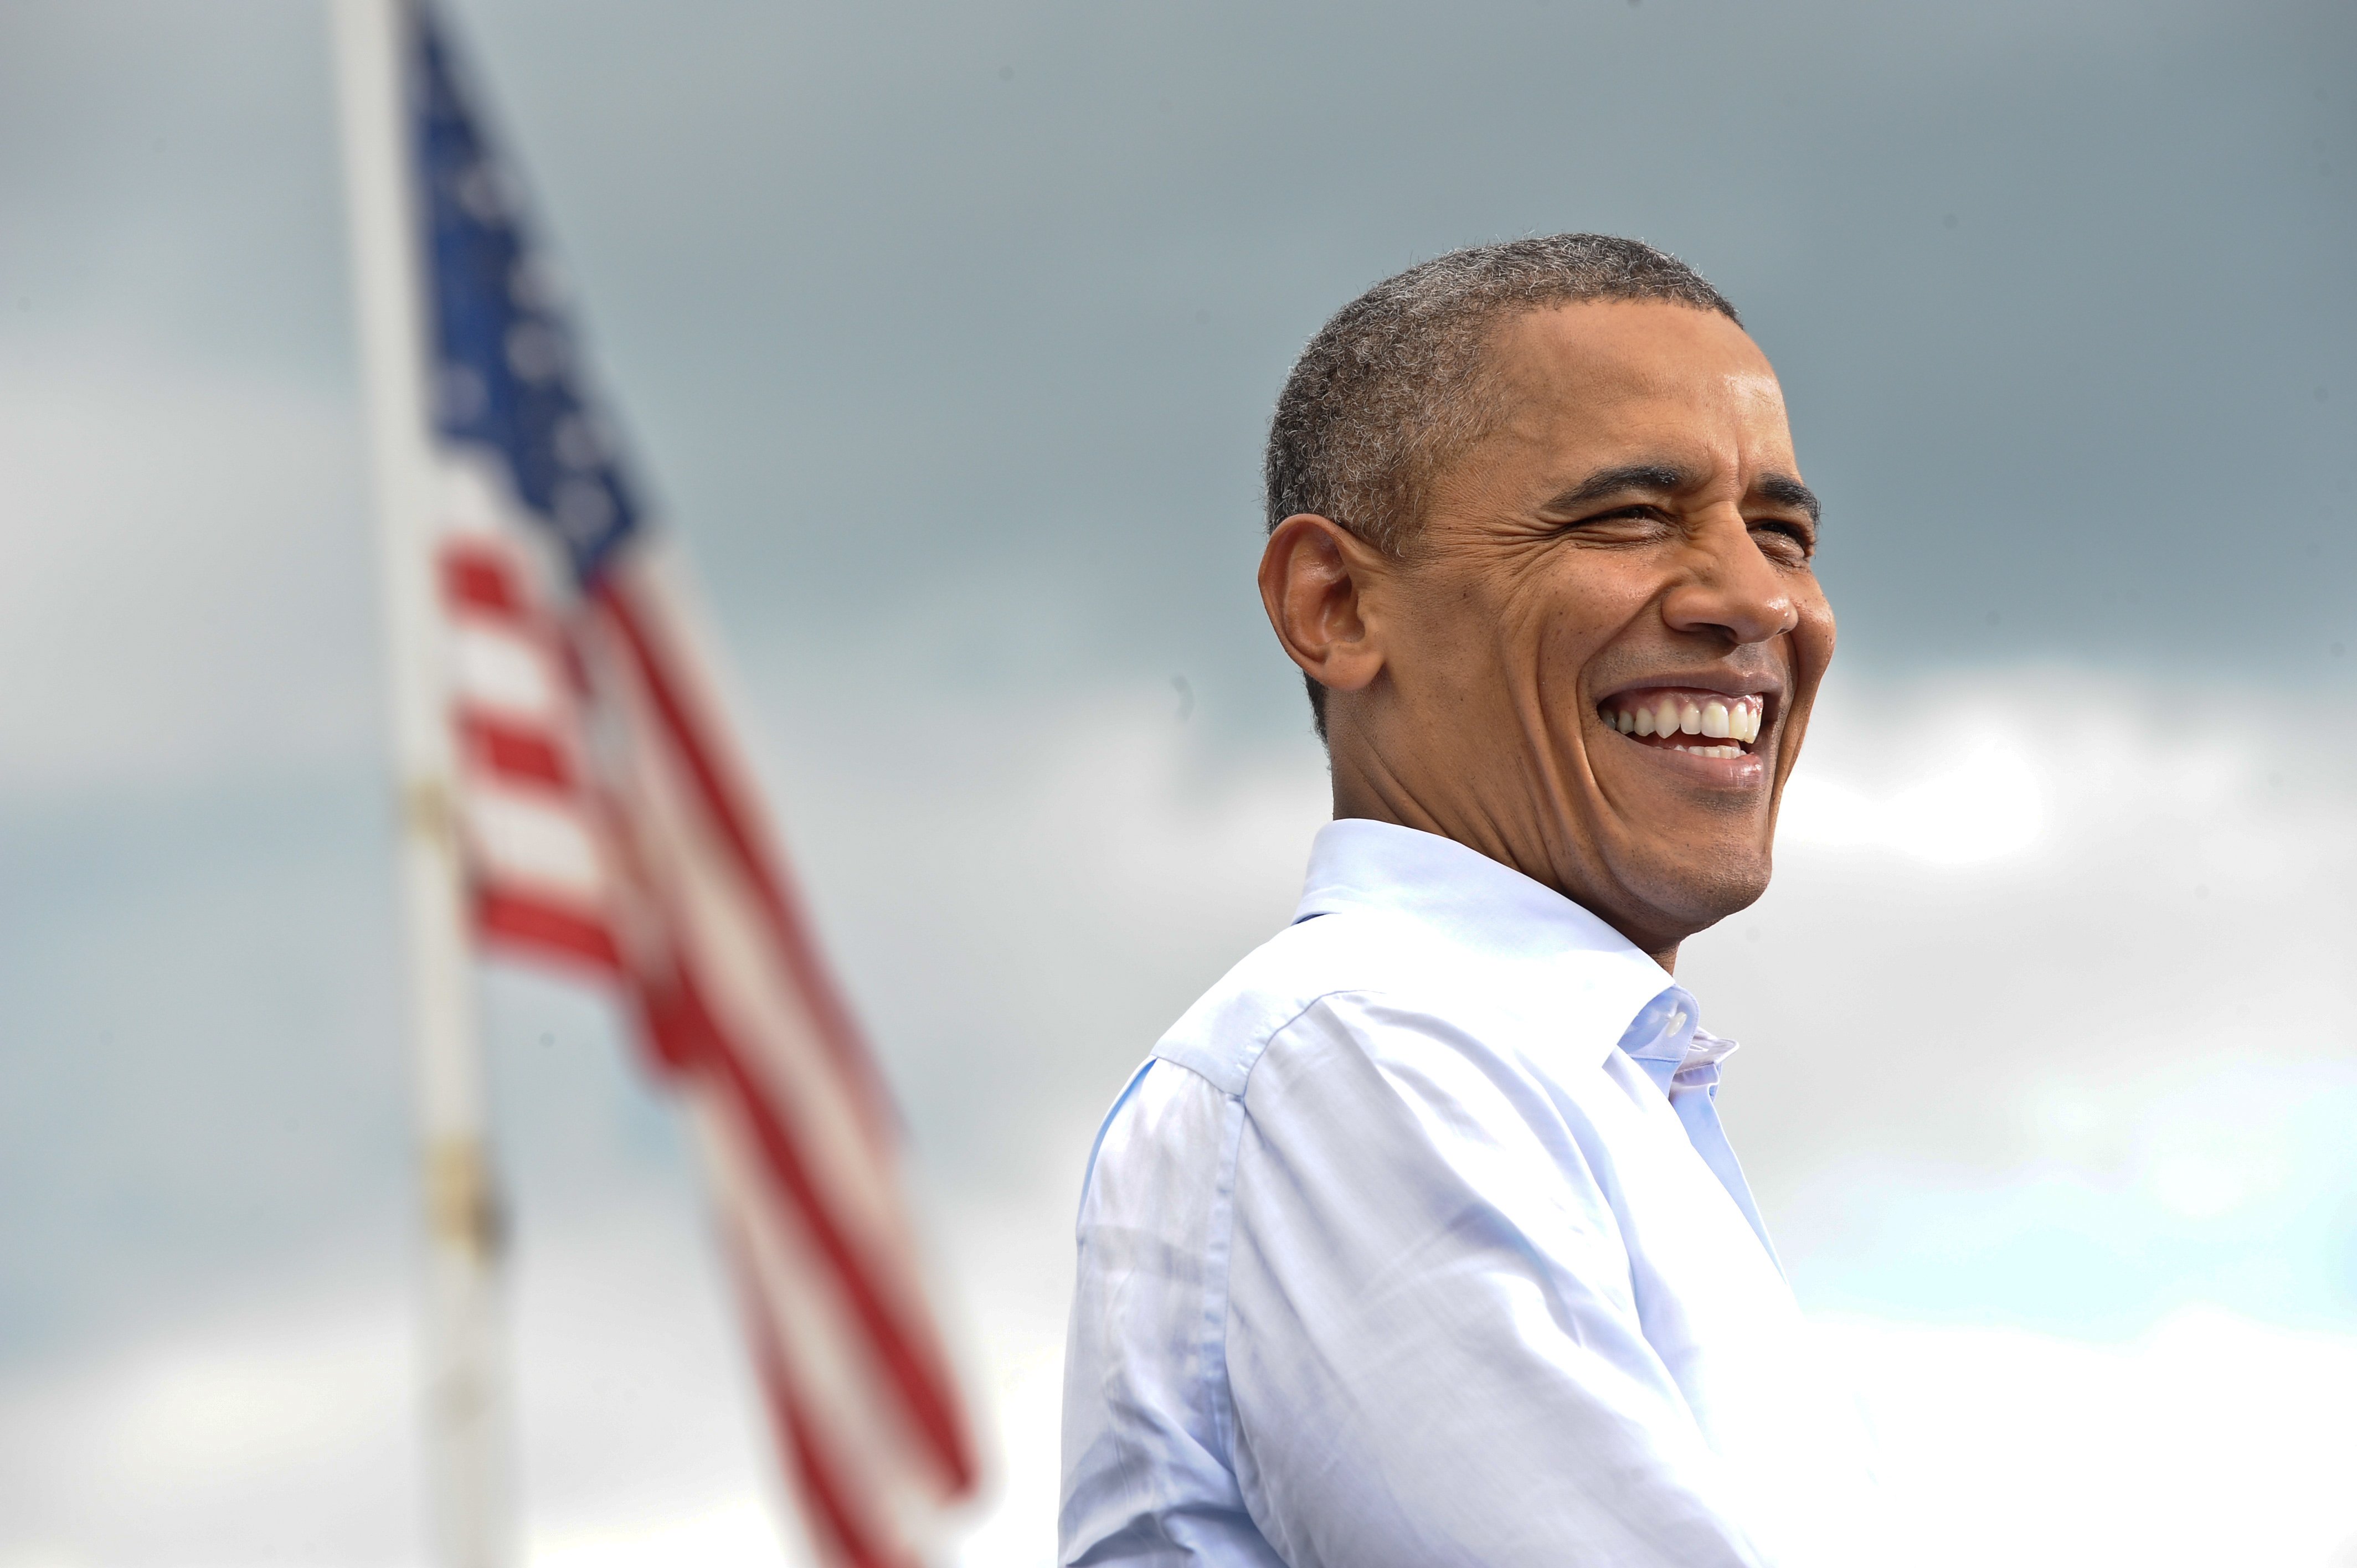 President Obama is gaining support at the end of his second term. 